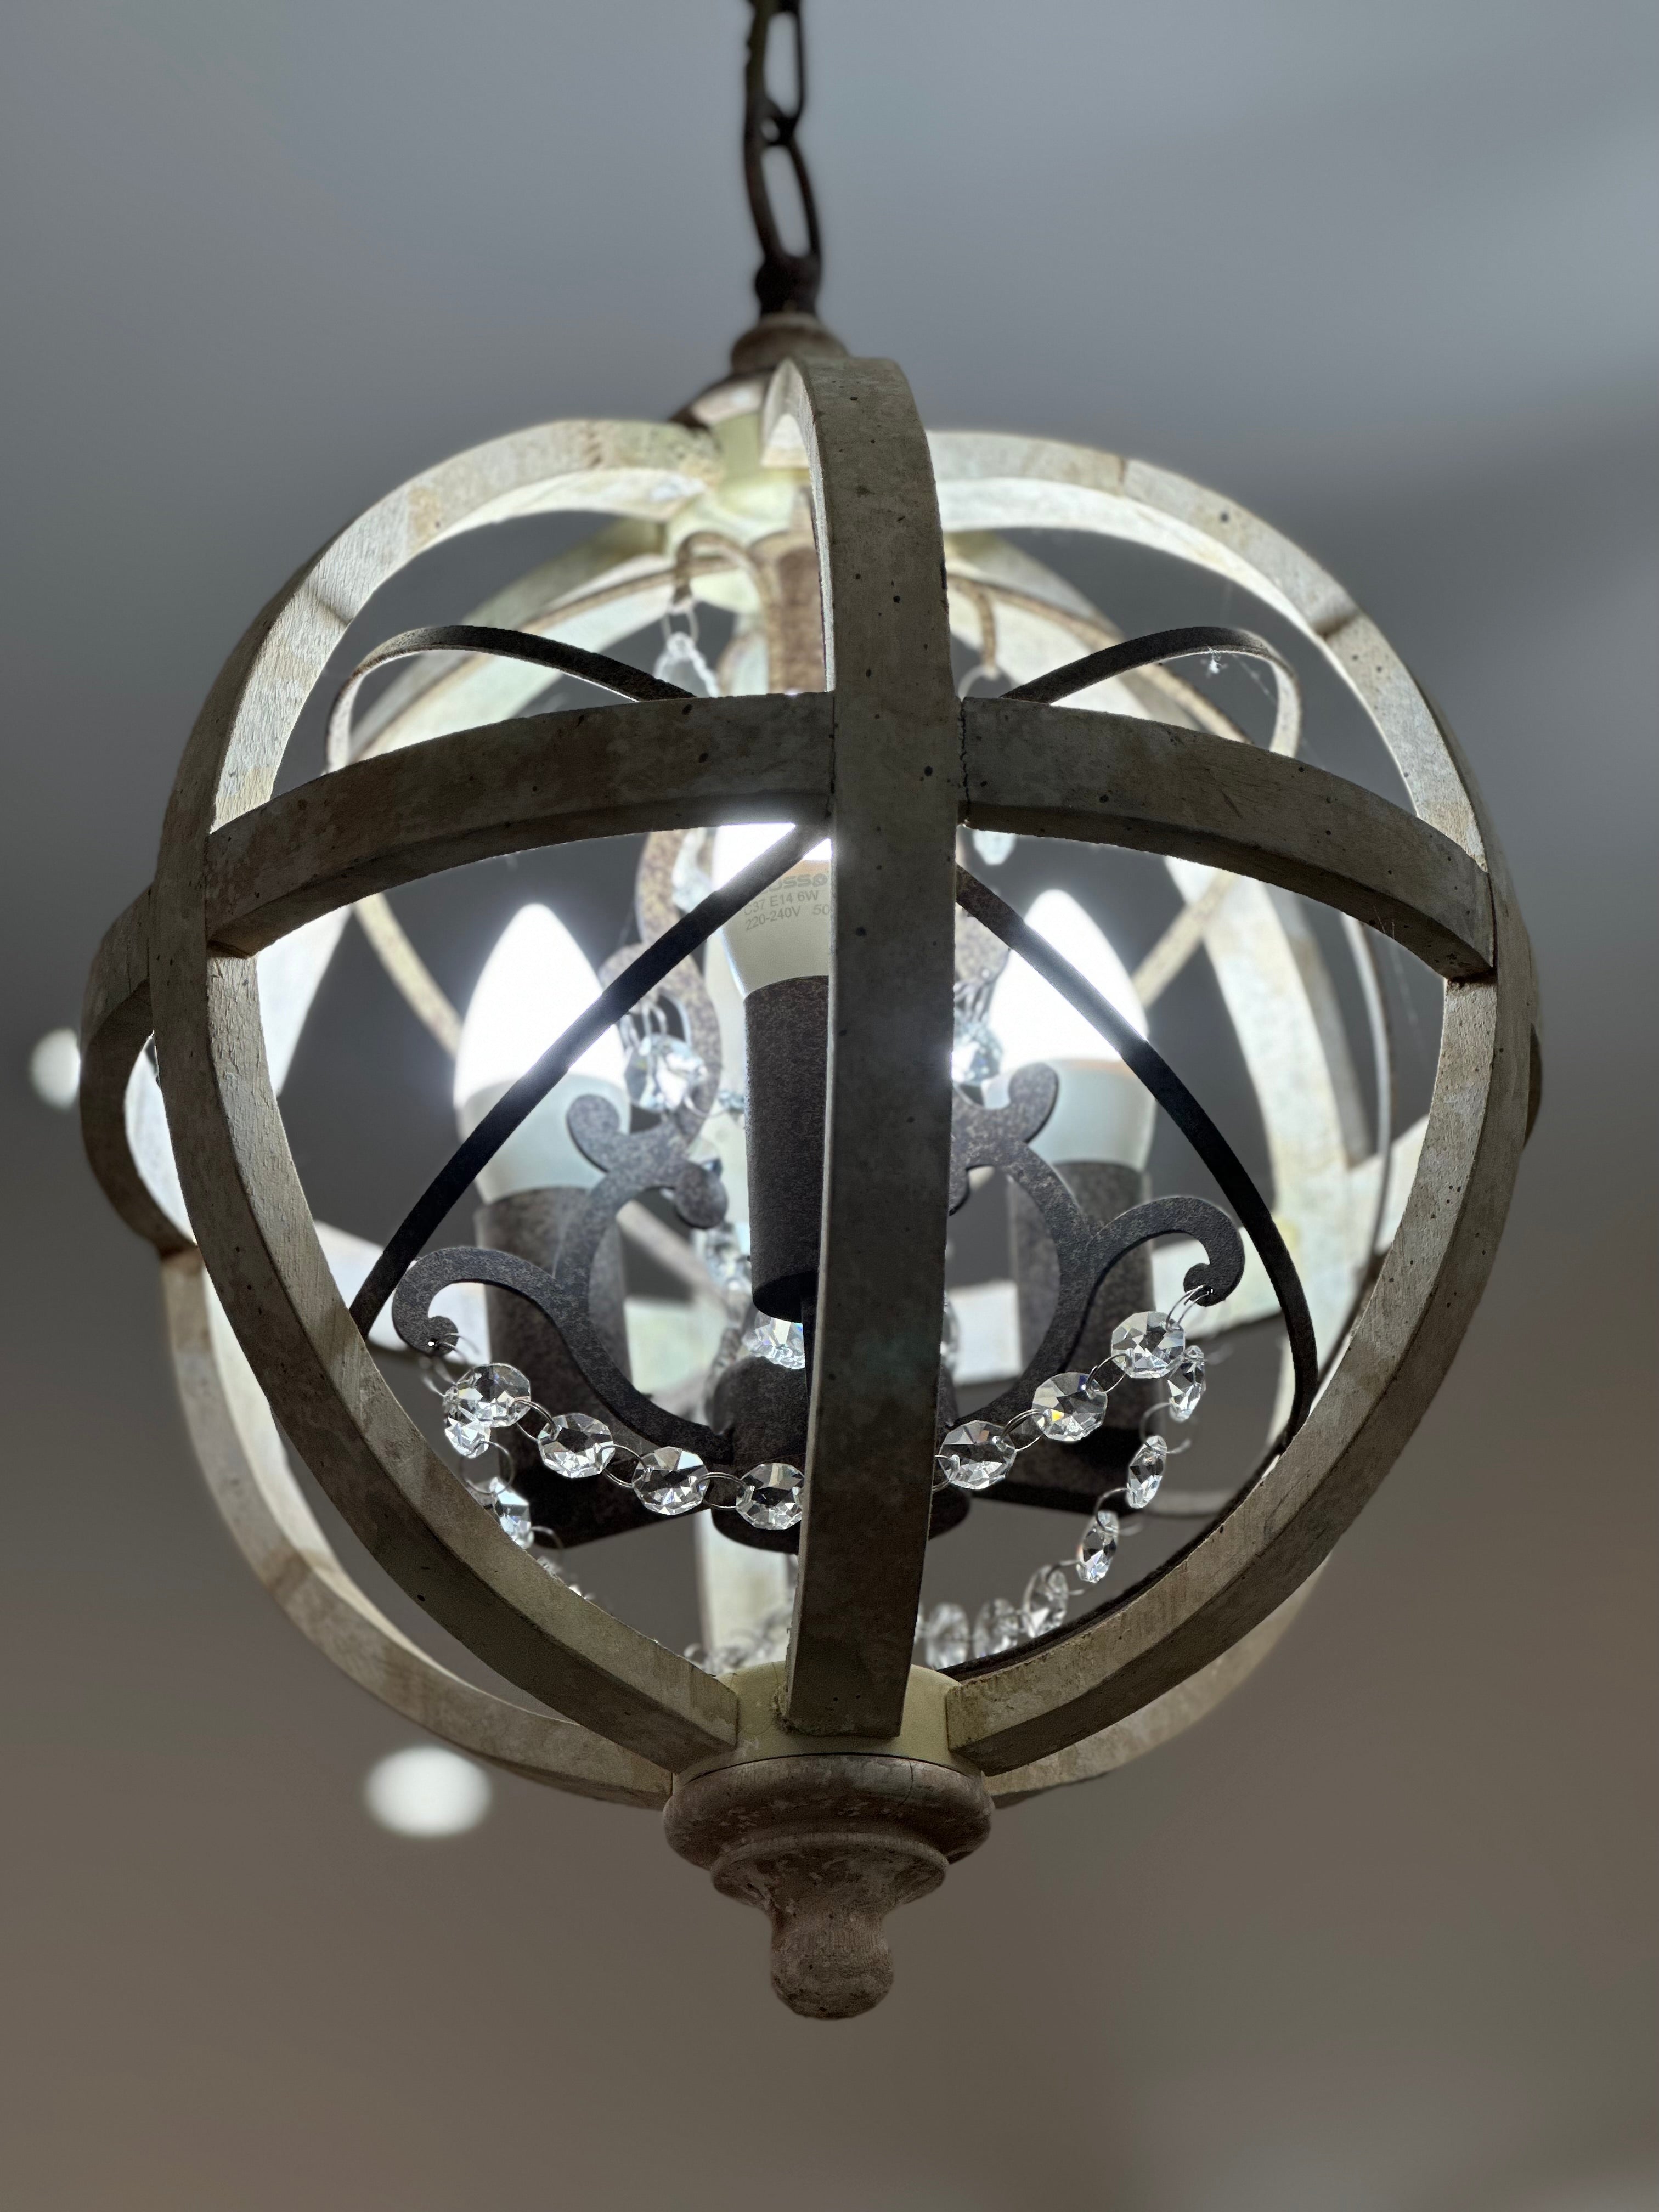 Small Wooden Globe with Crystals Chandelier